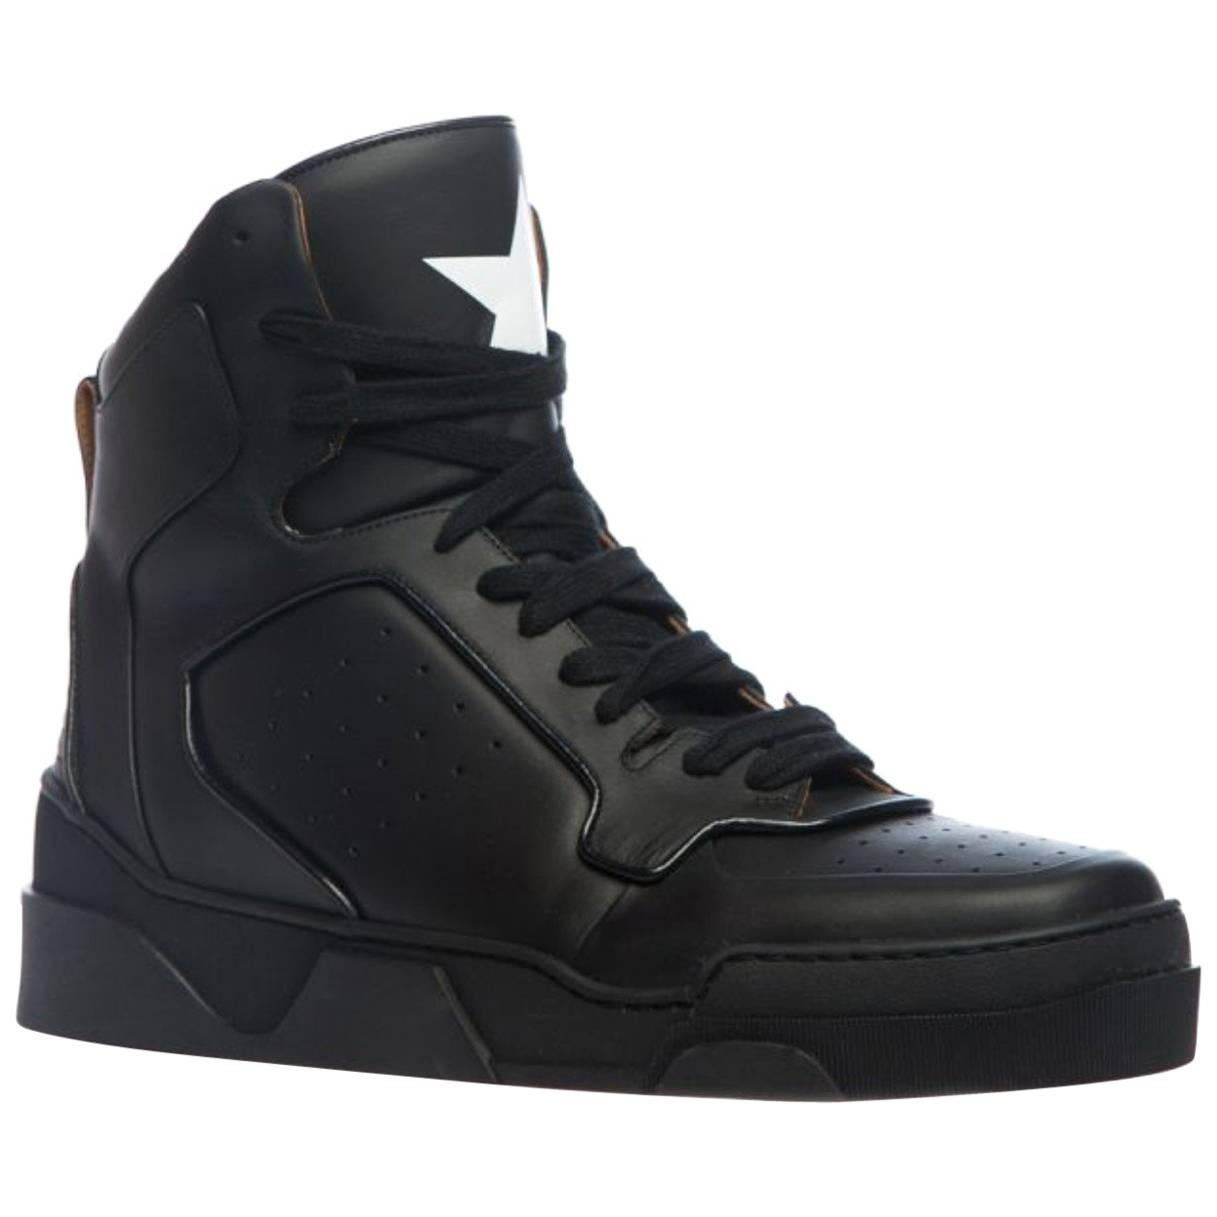 Givenchy Tyson Iii Hi-Top Sneakers (Size - 45) For Sale